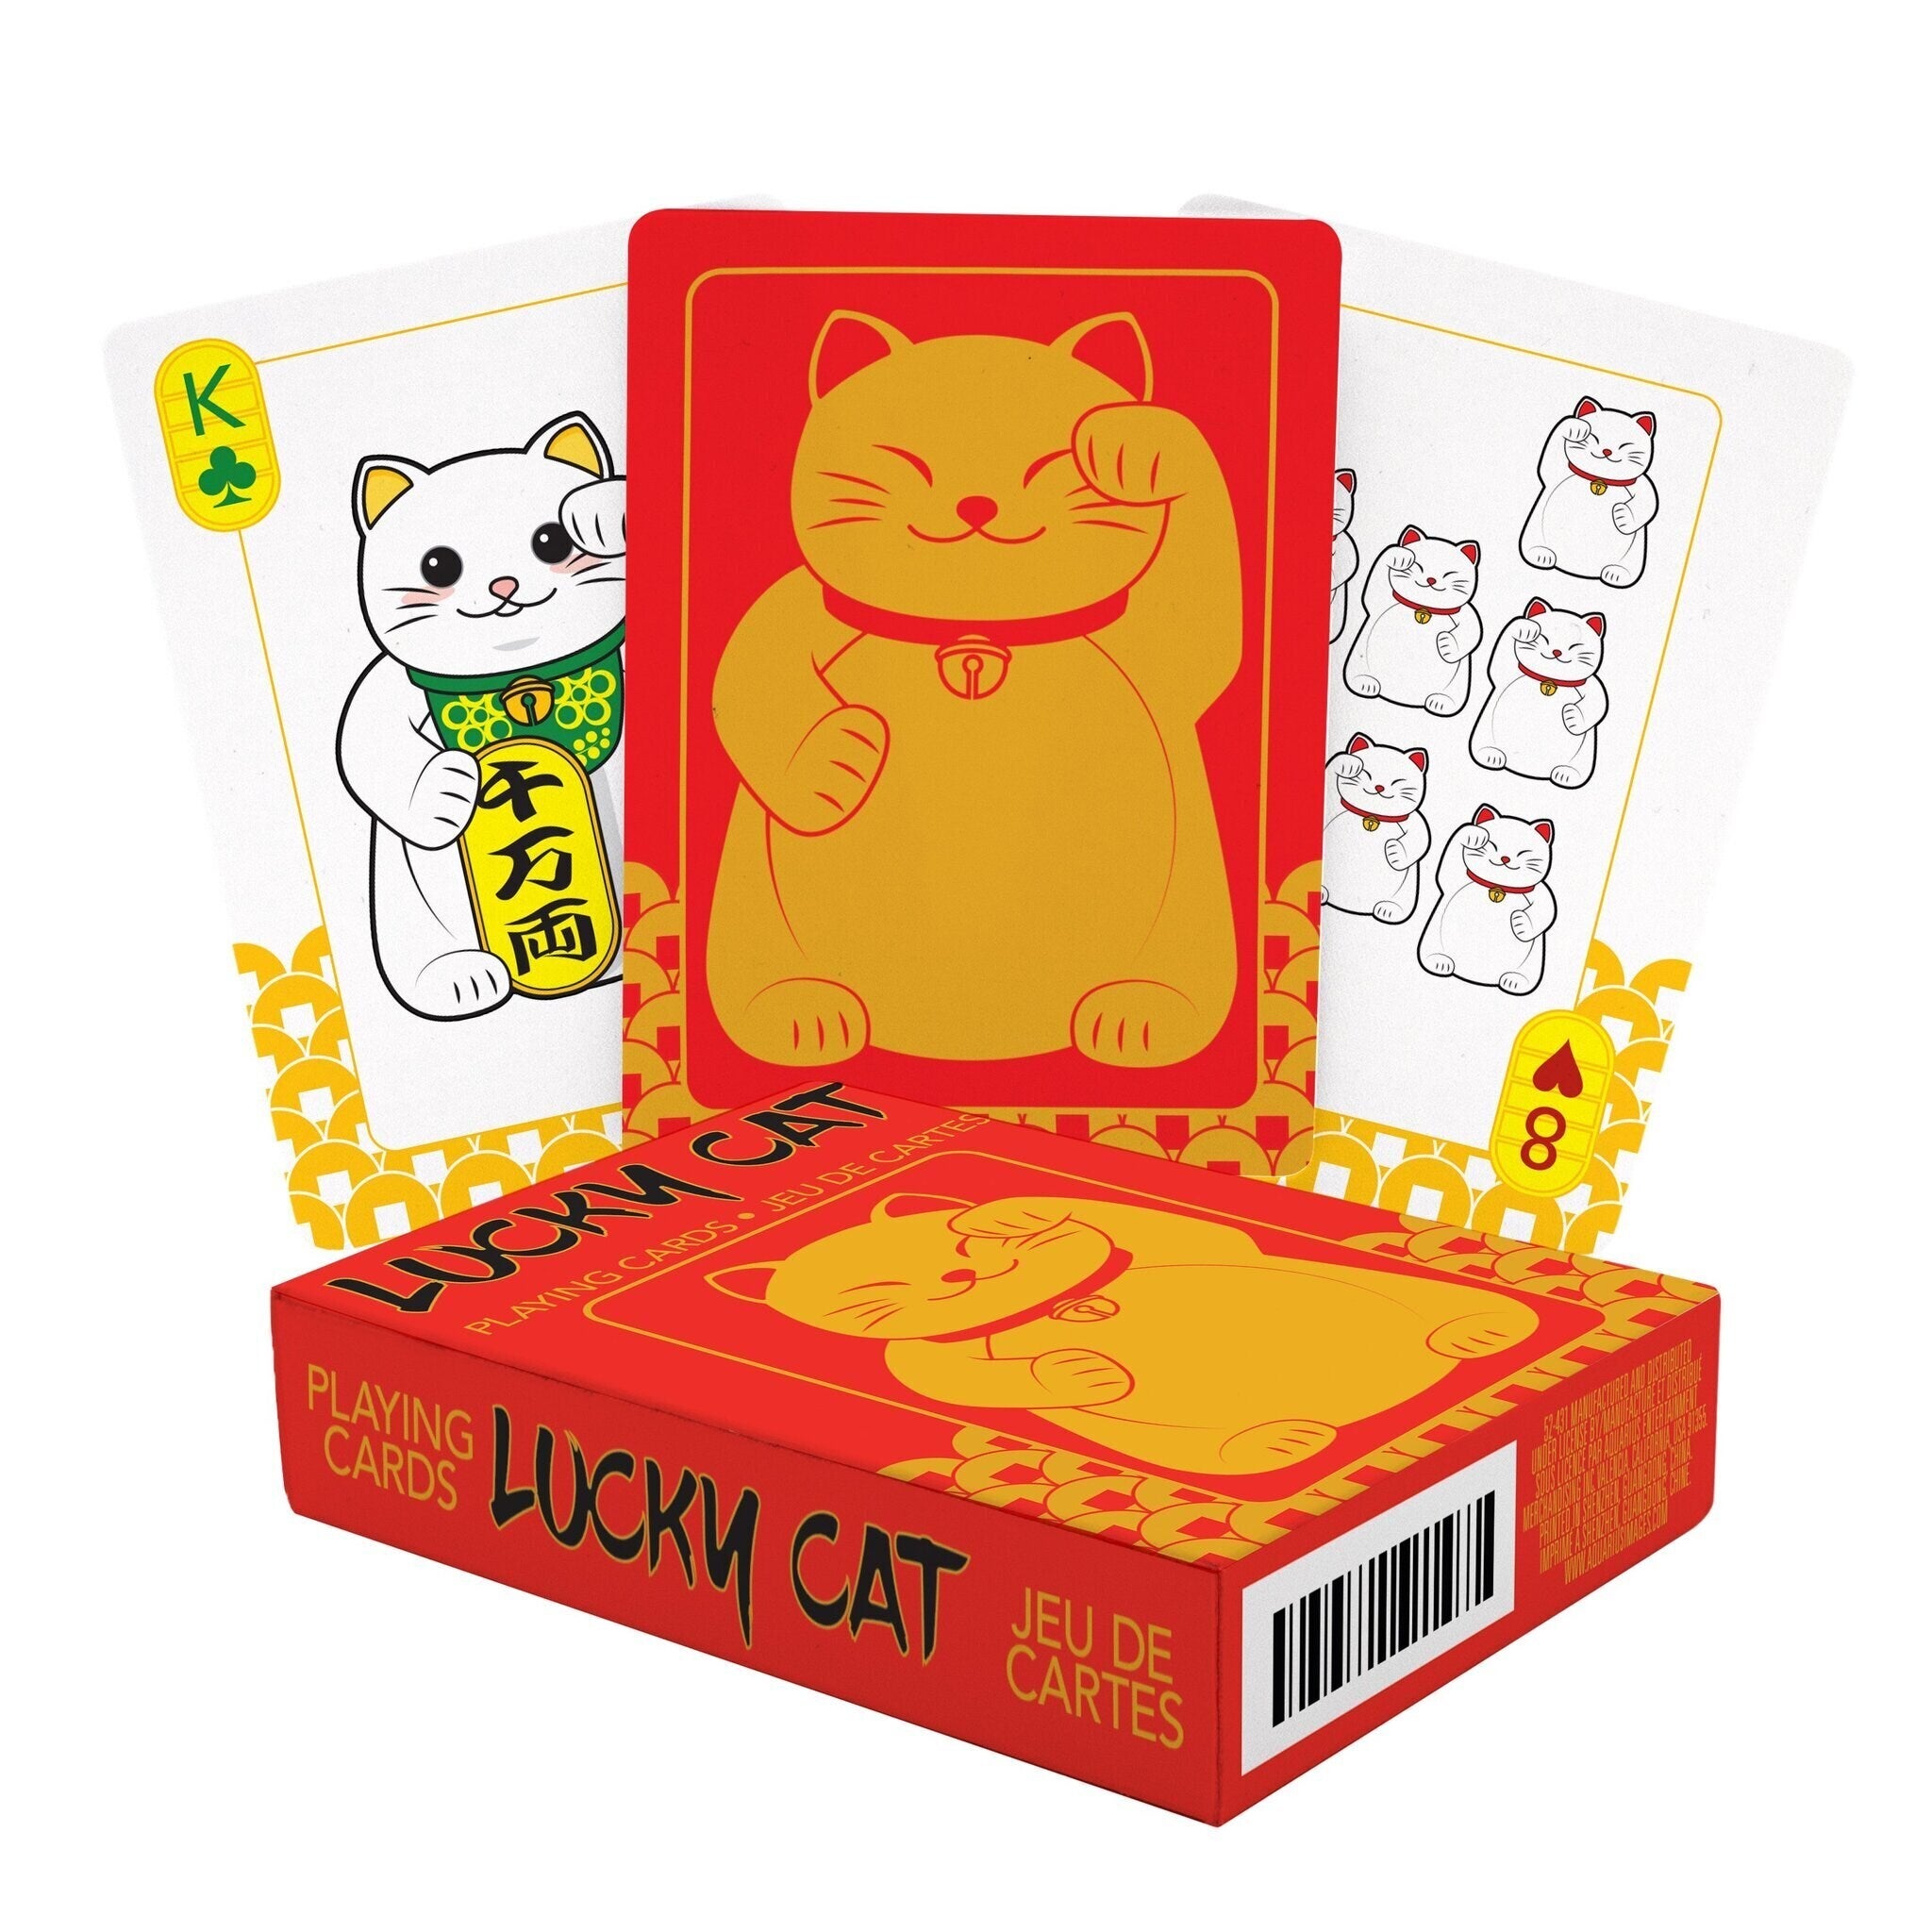 PLAYING CARD DECK LUCKY CAT 52 CARDS NEW 52431 